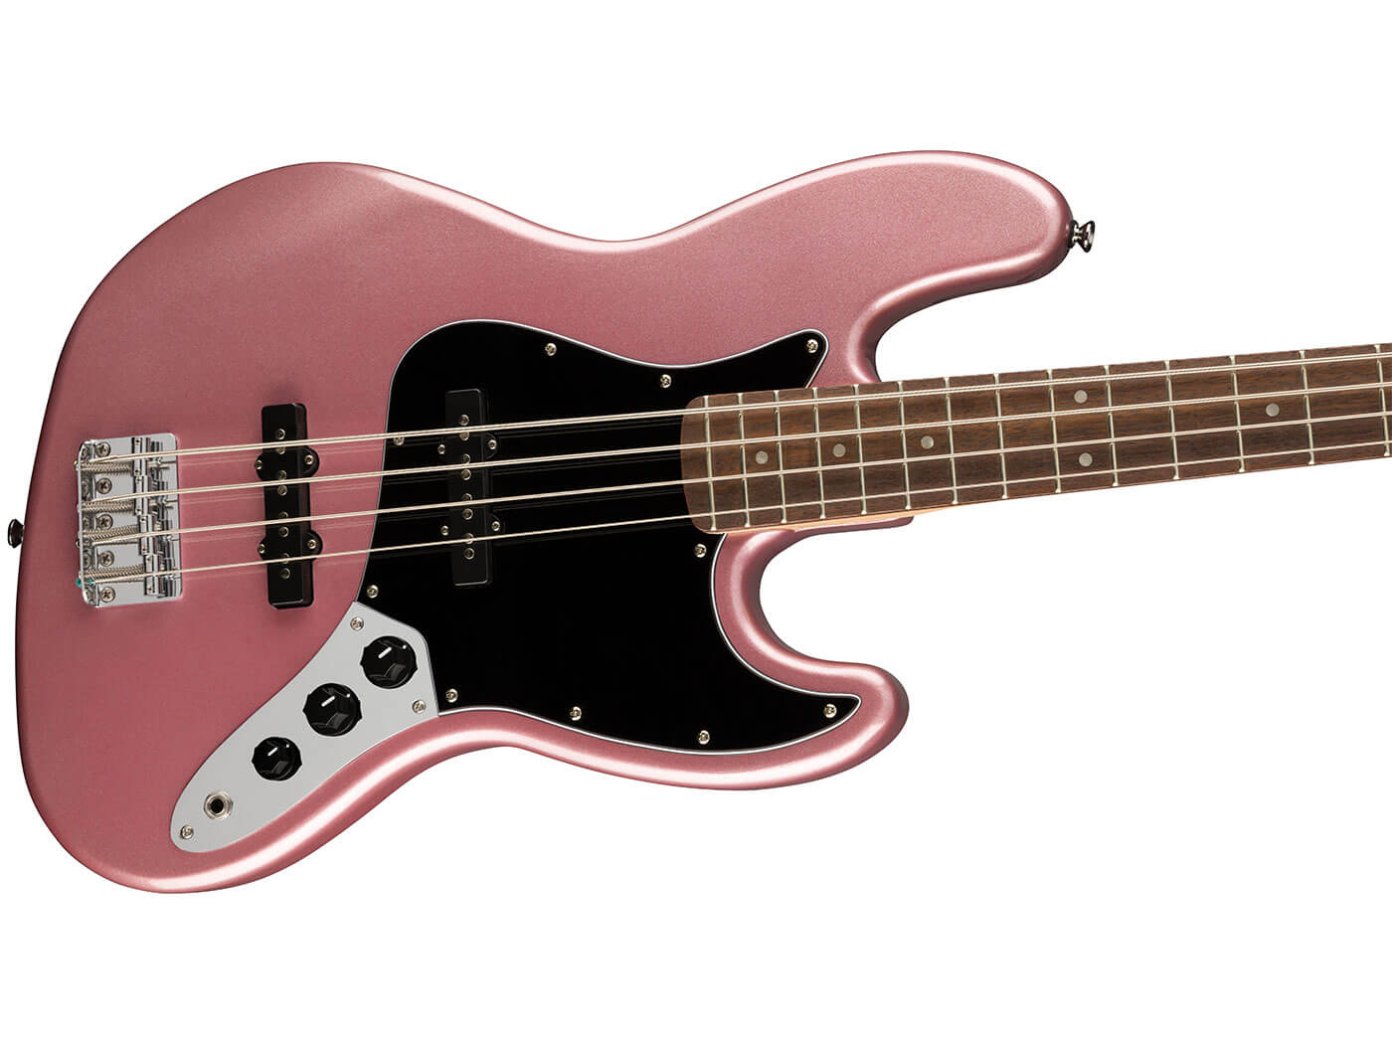 Squier officially launches refreshed Affinity range, including a